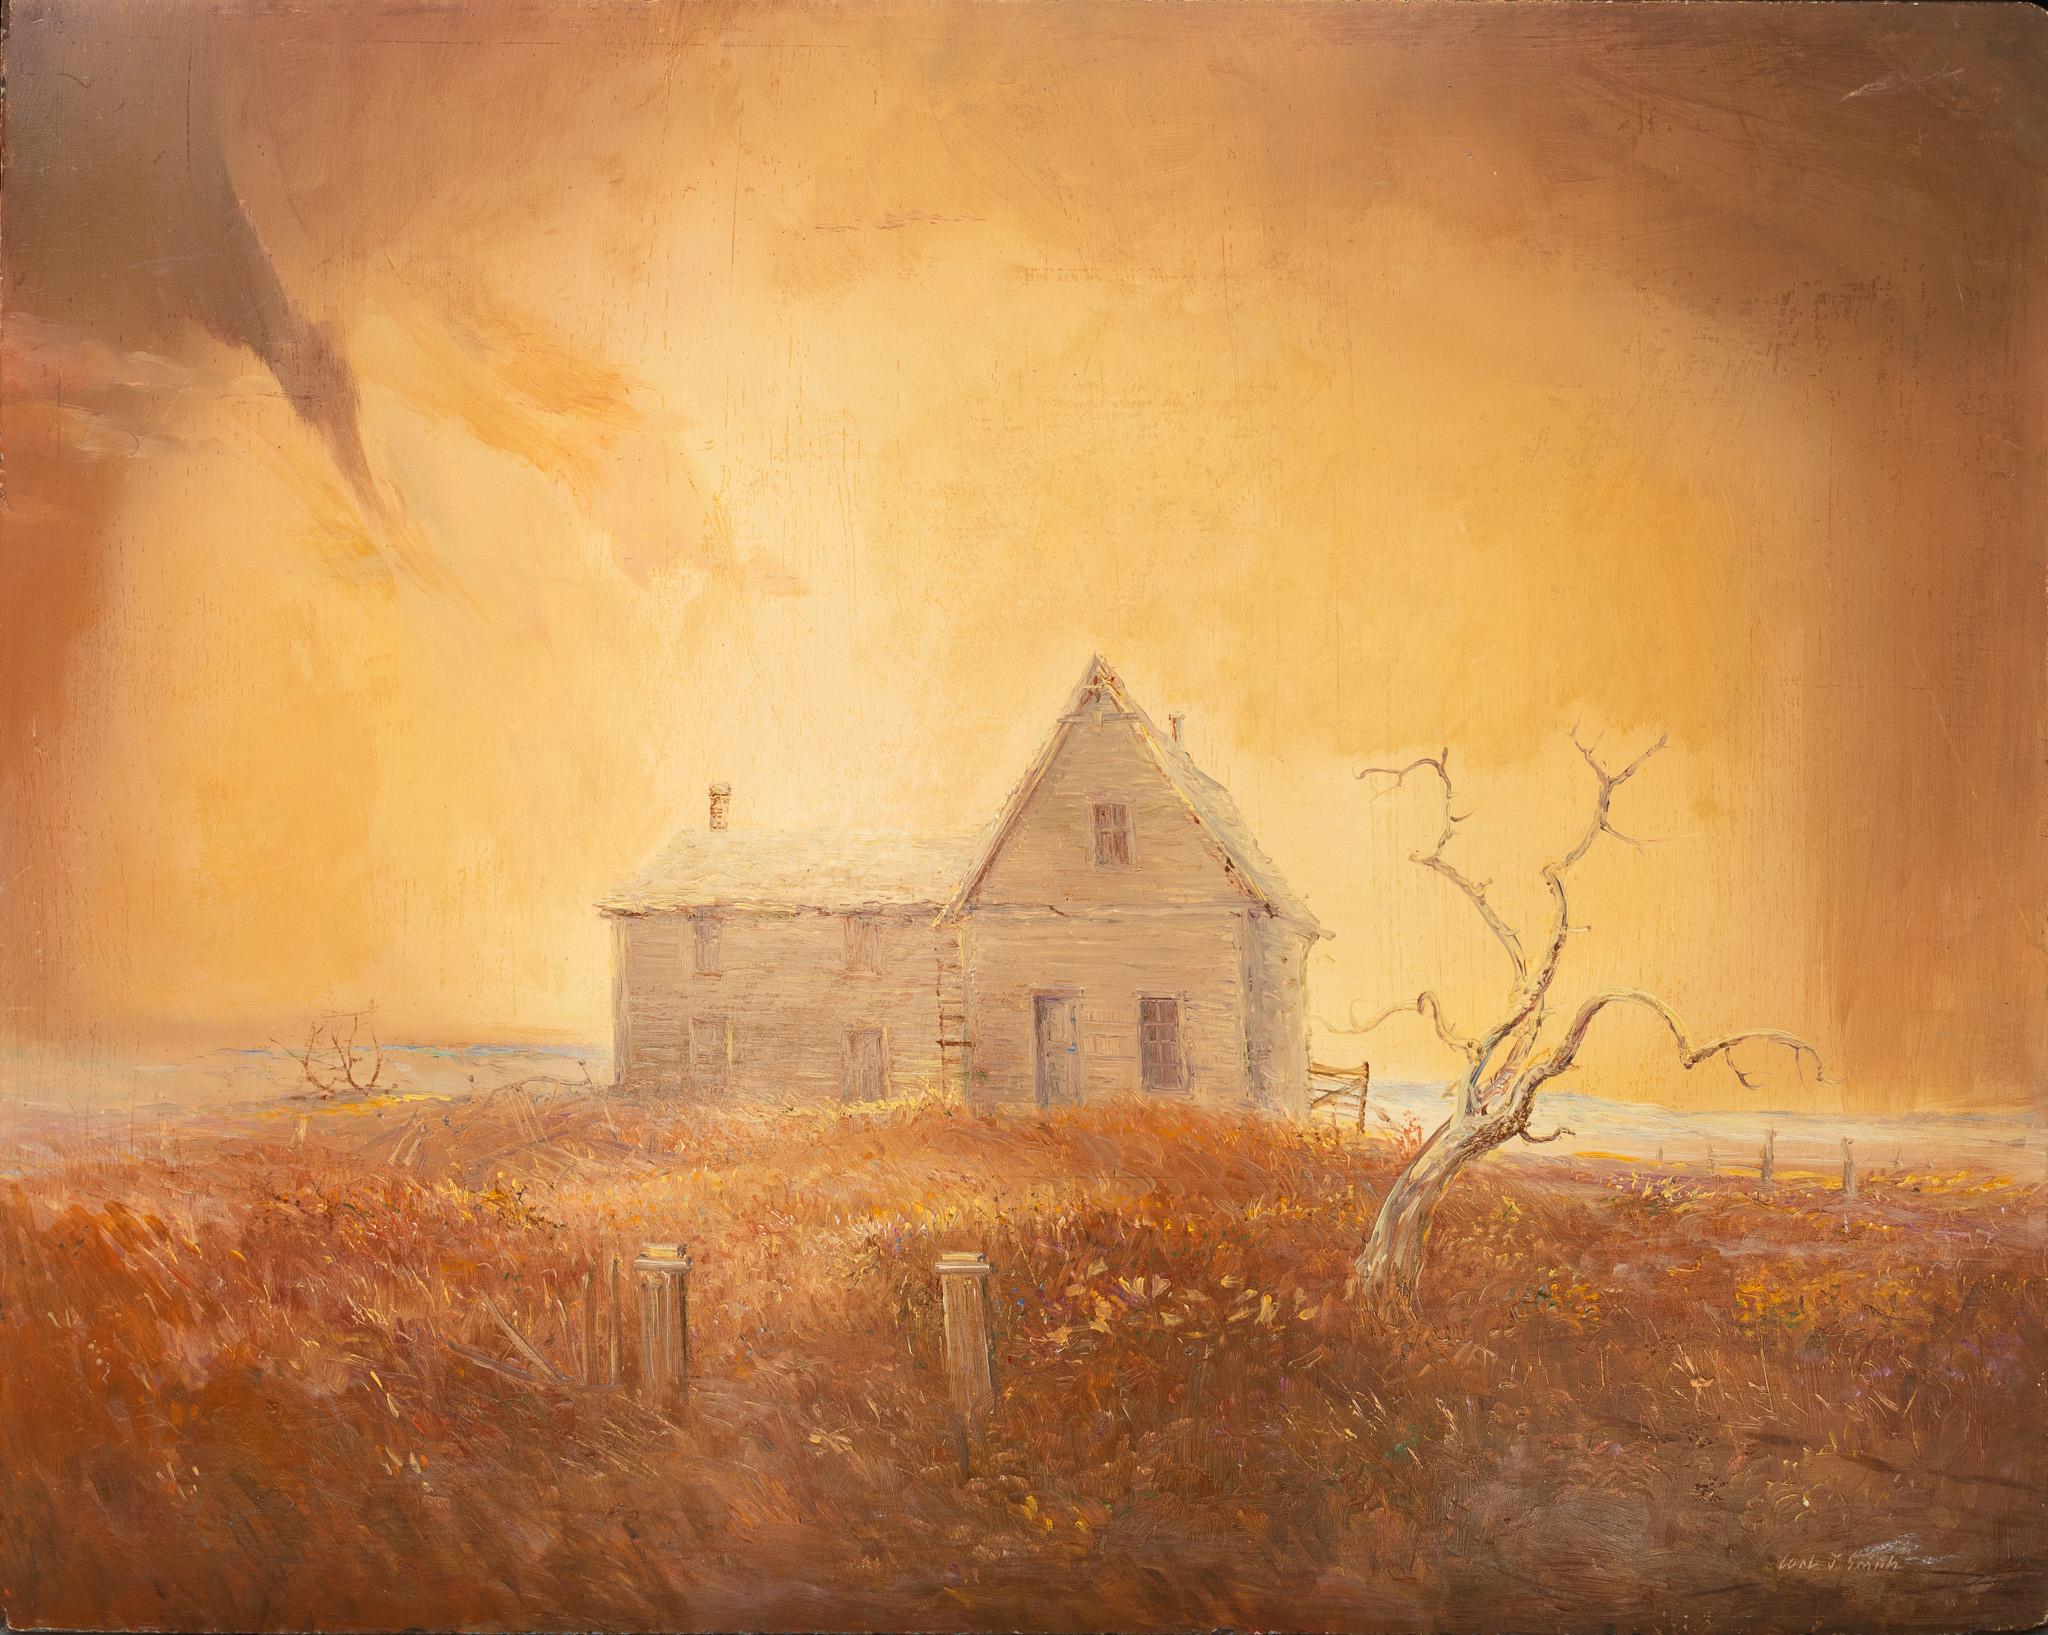 Home on a Prairie - Painting by Carl J. Smith